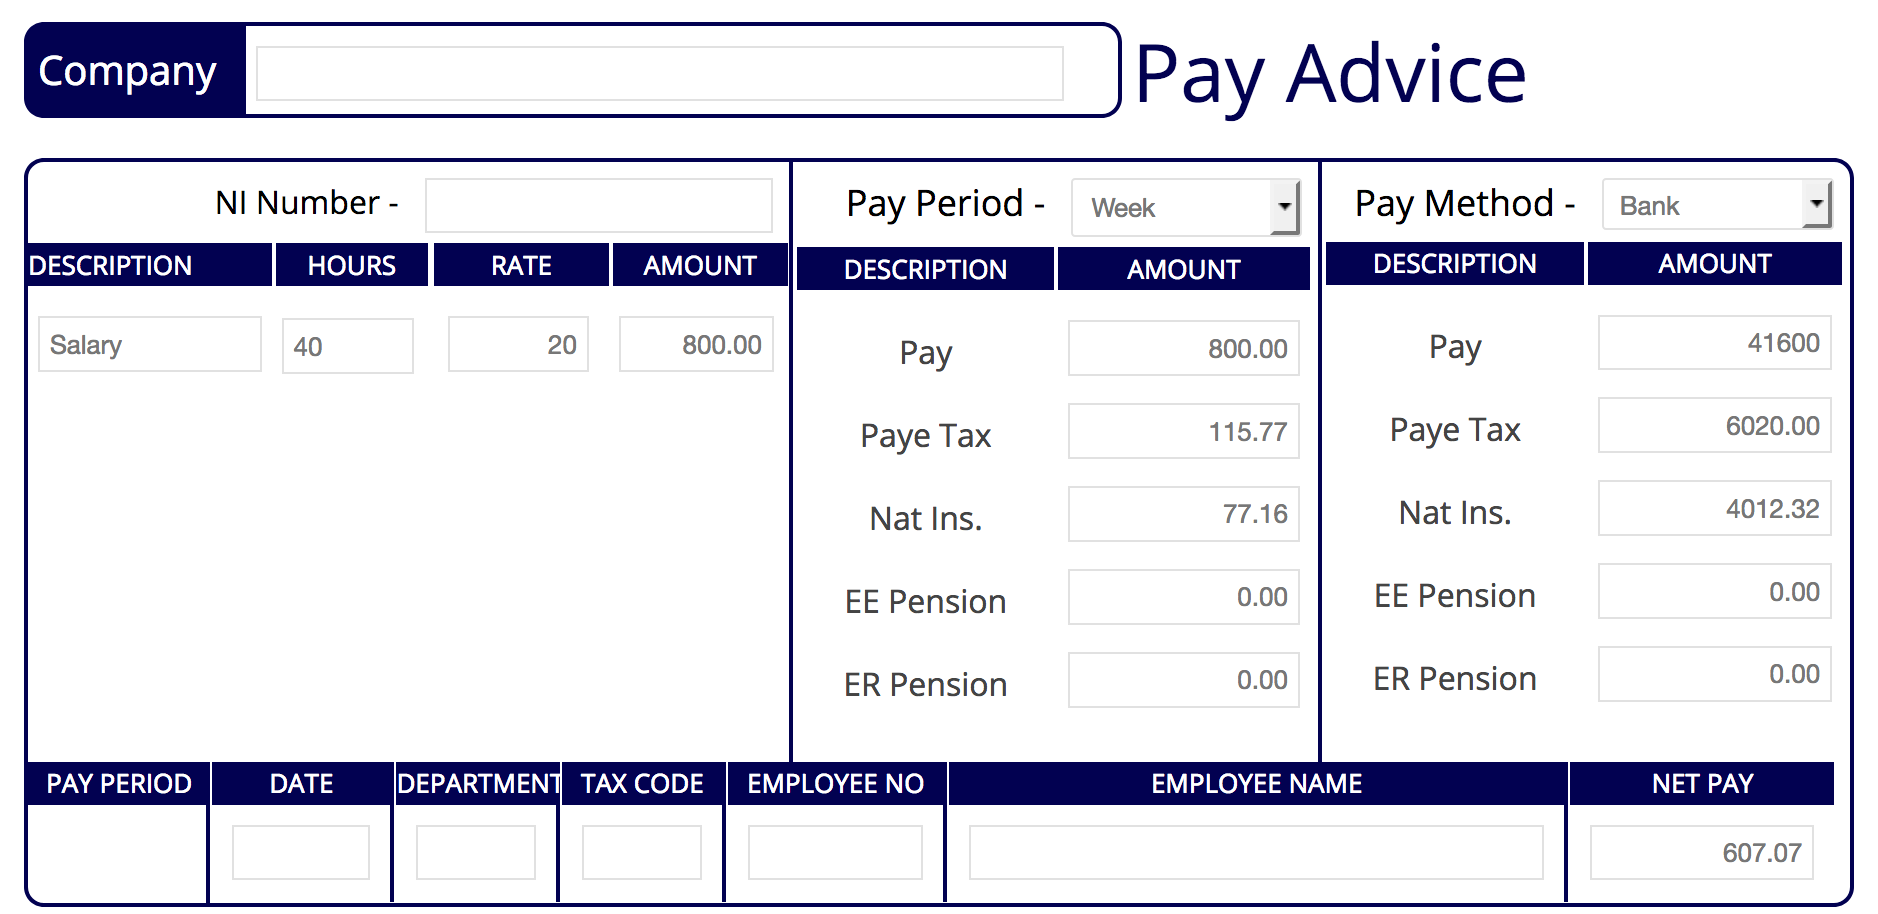 Sample pay advice for loan application page